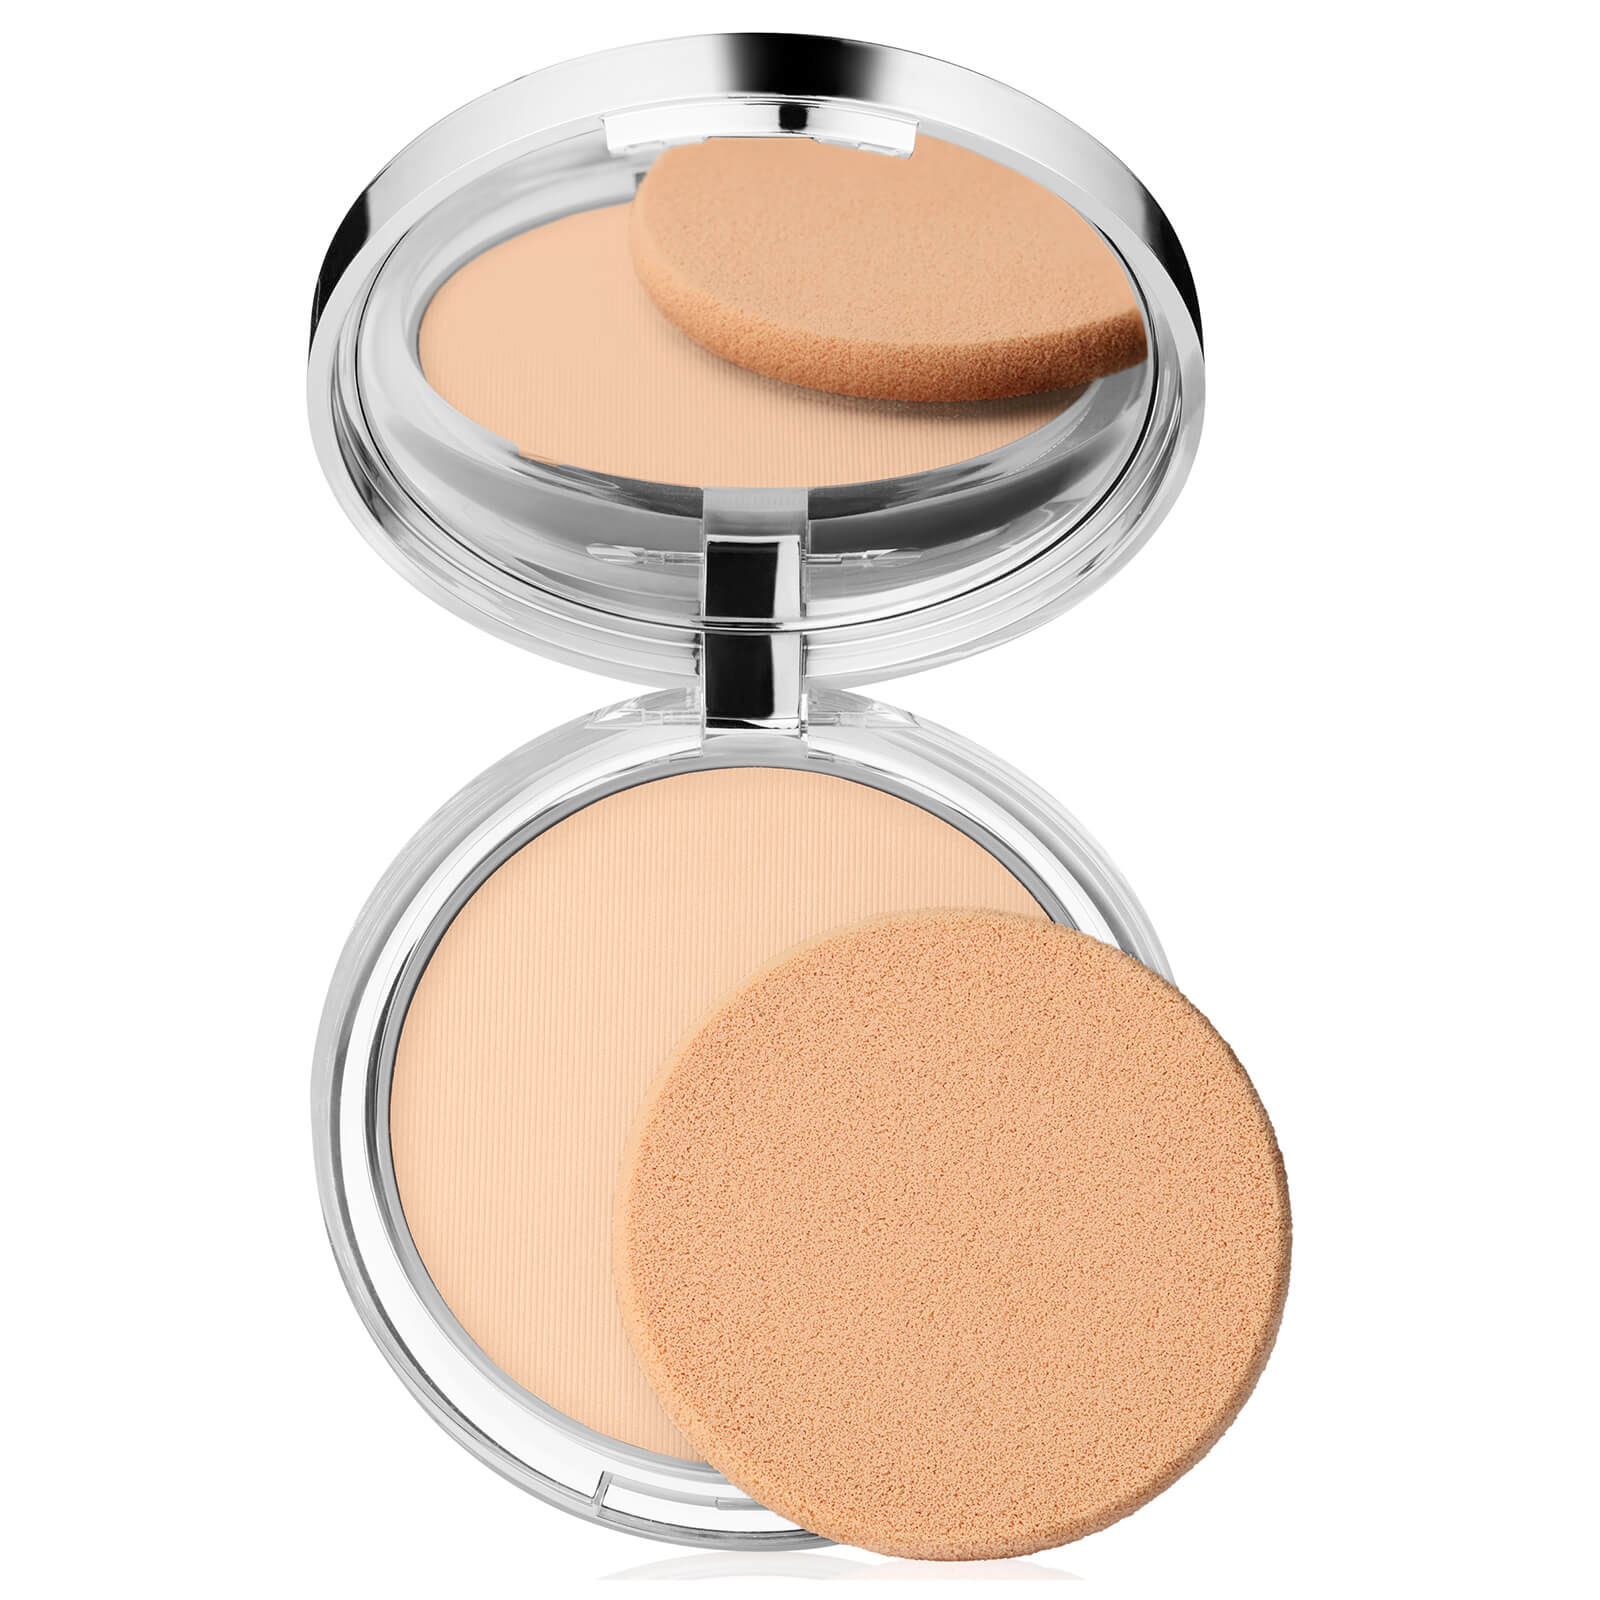 Clinique Stay-Matte Sheer Pressed Powder Oil-Free 7.6g (Various Shades) - Stay Neutral